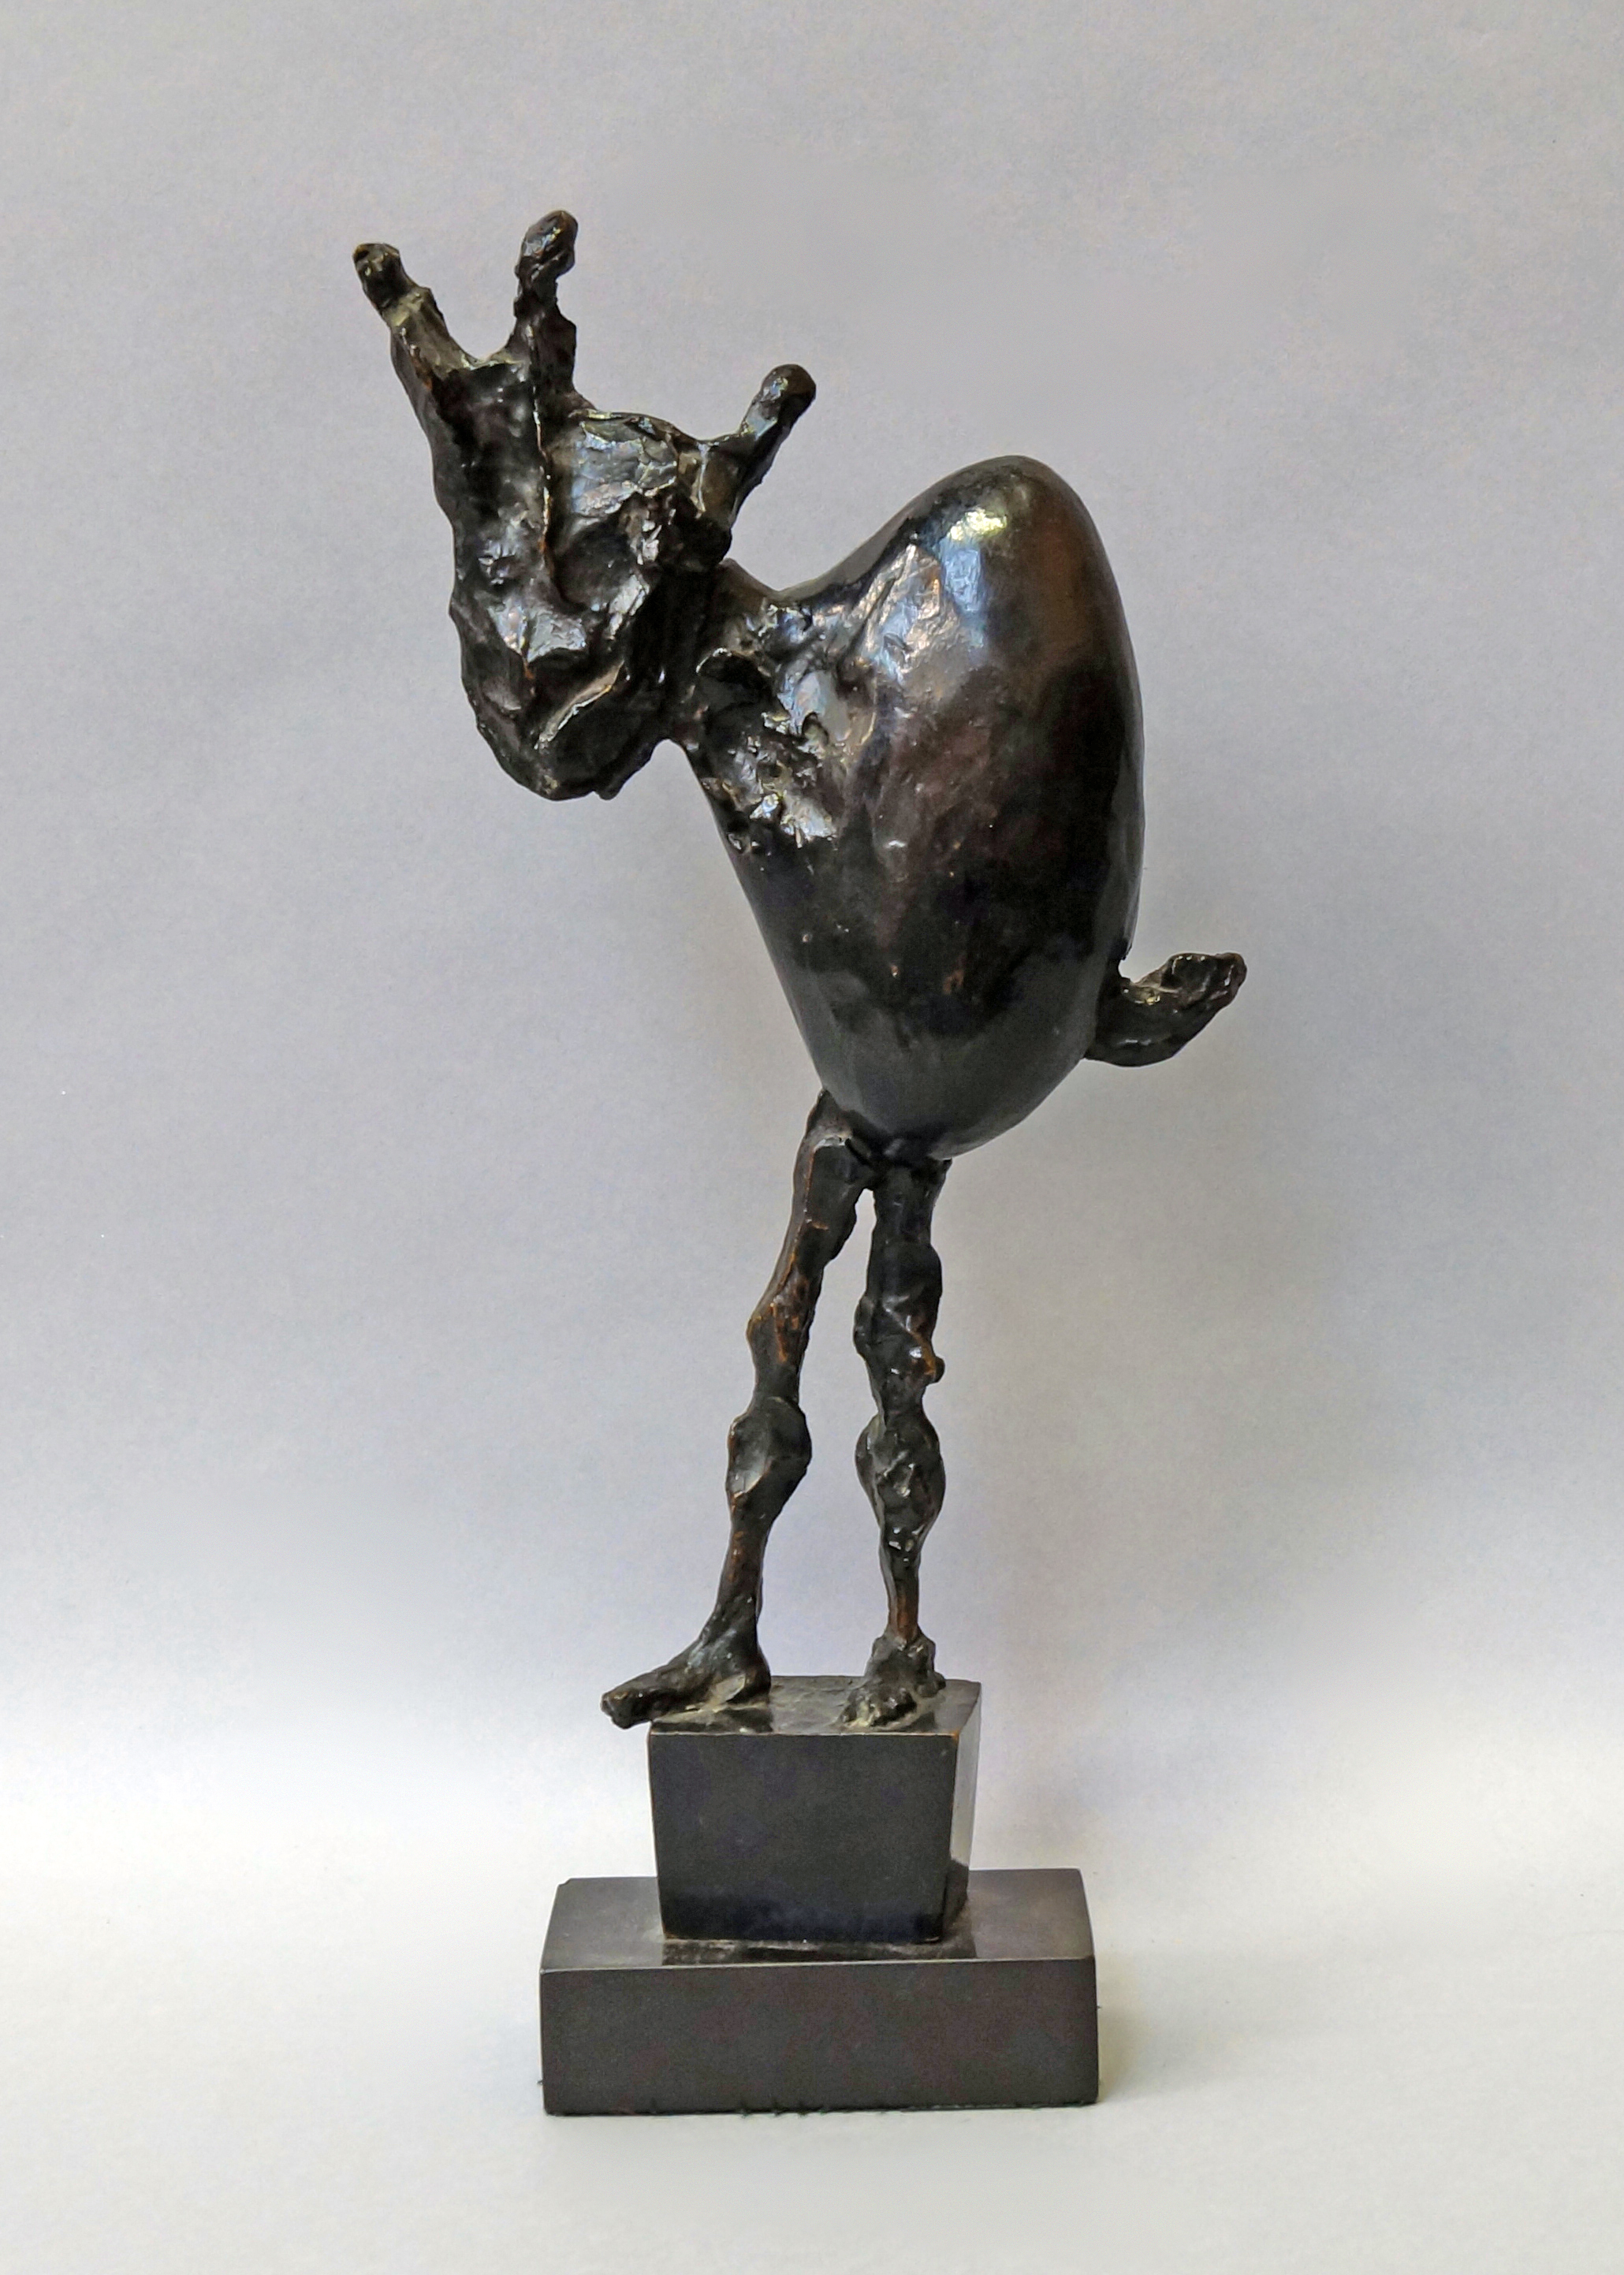 ‘Le Petit Fou’ represents a hybrid of the human and animal forms, a signature subject choice of the artist, Germaine Richier. Estimated to sell for £6,000-£8,000, it achieved £9,594. Roseberys image